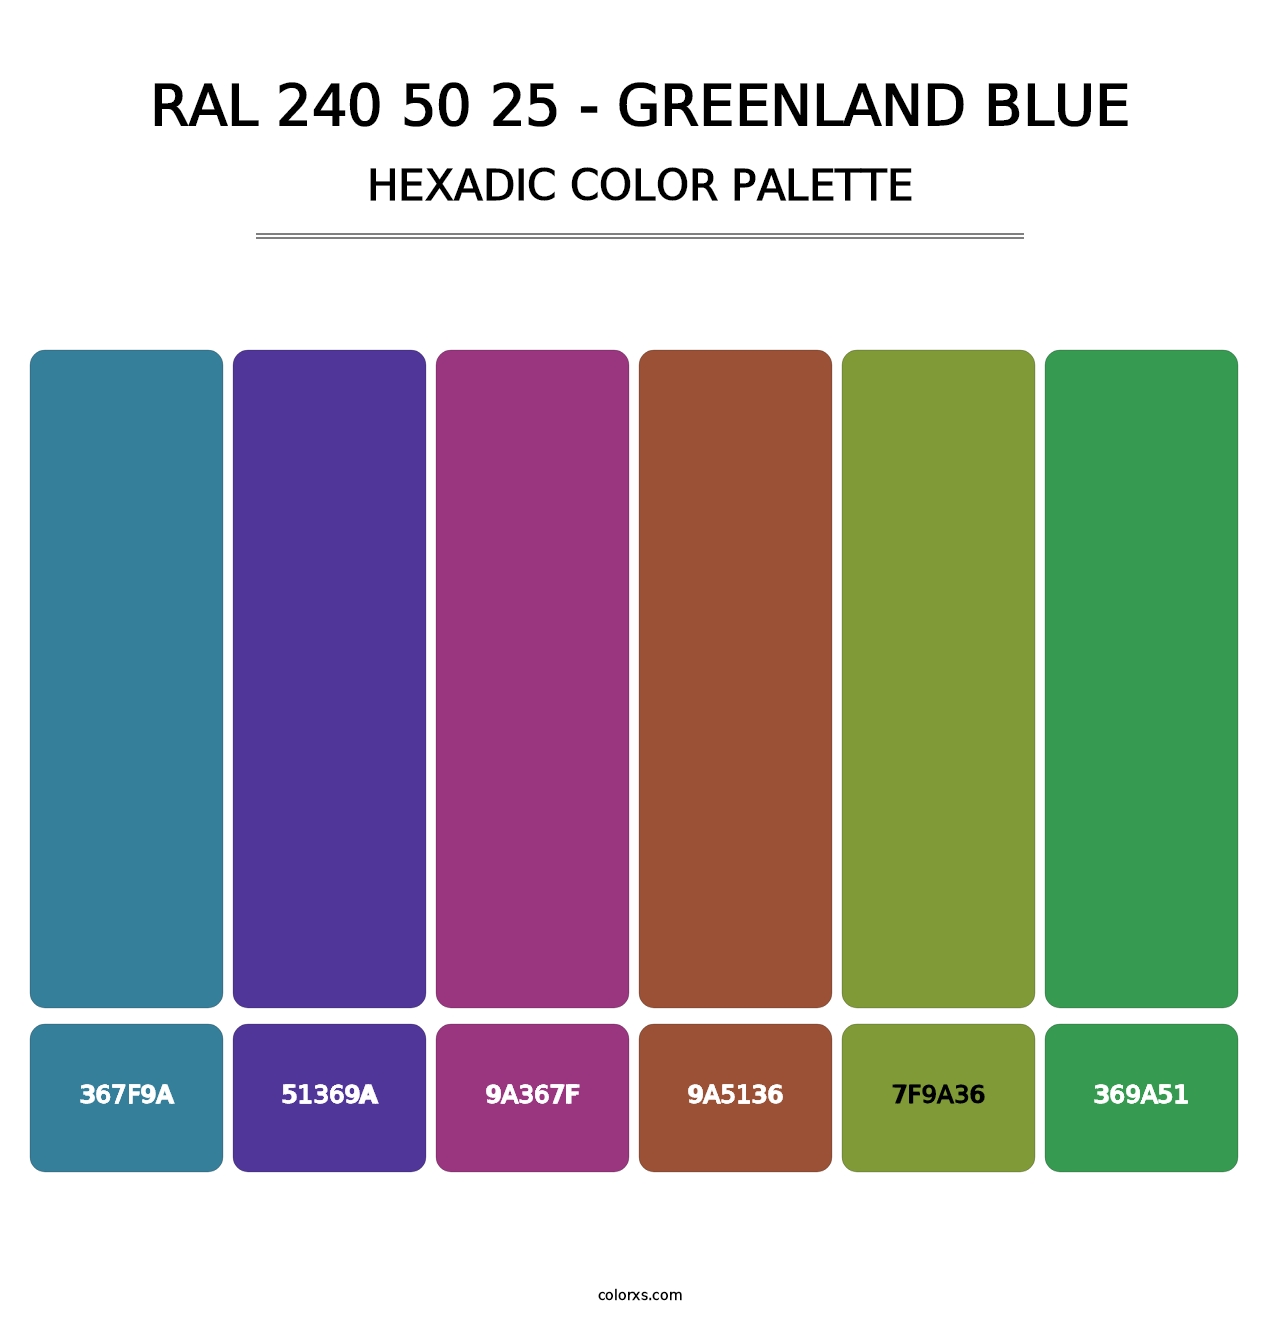 RAL 240 50 25 - Greenland Blue - Hexadic Color Palette